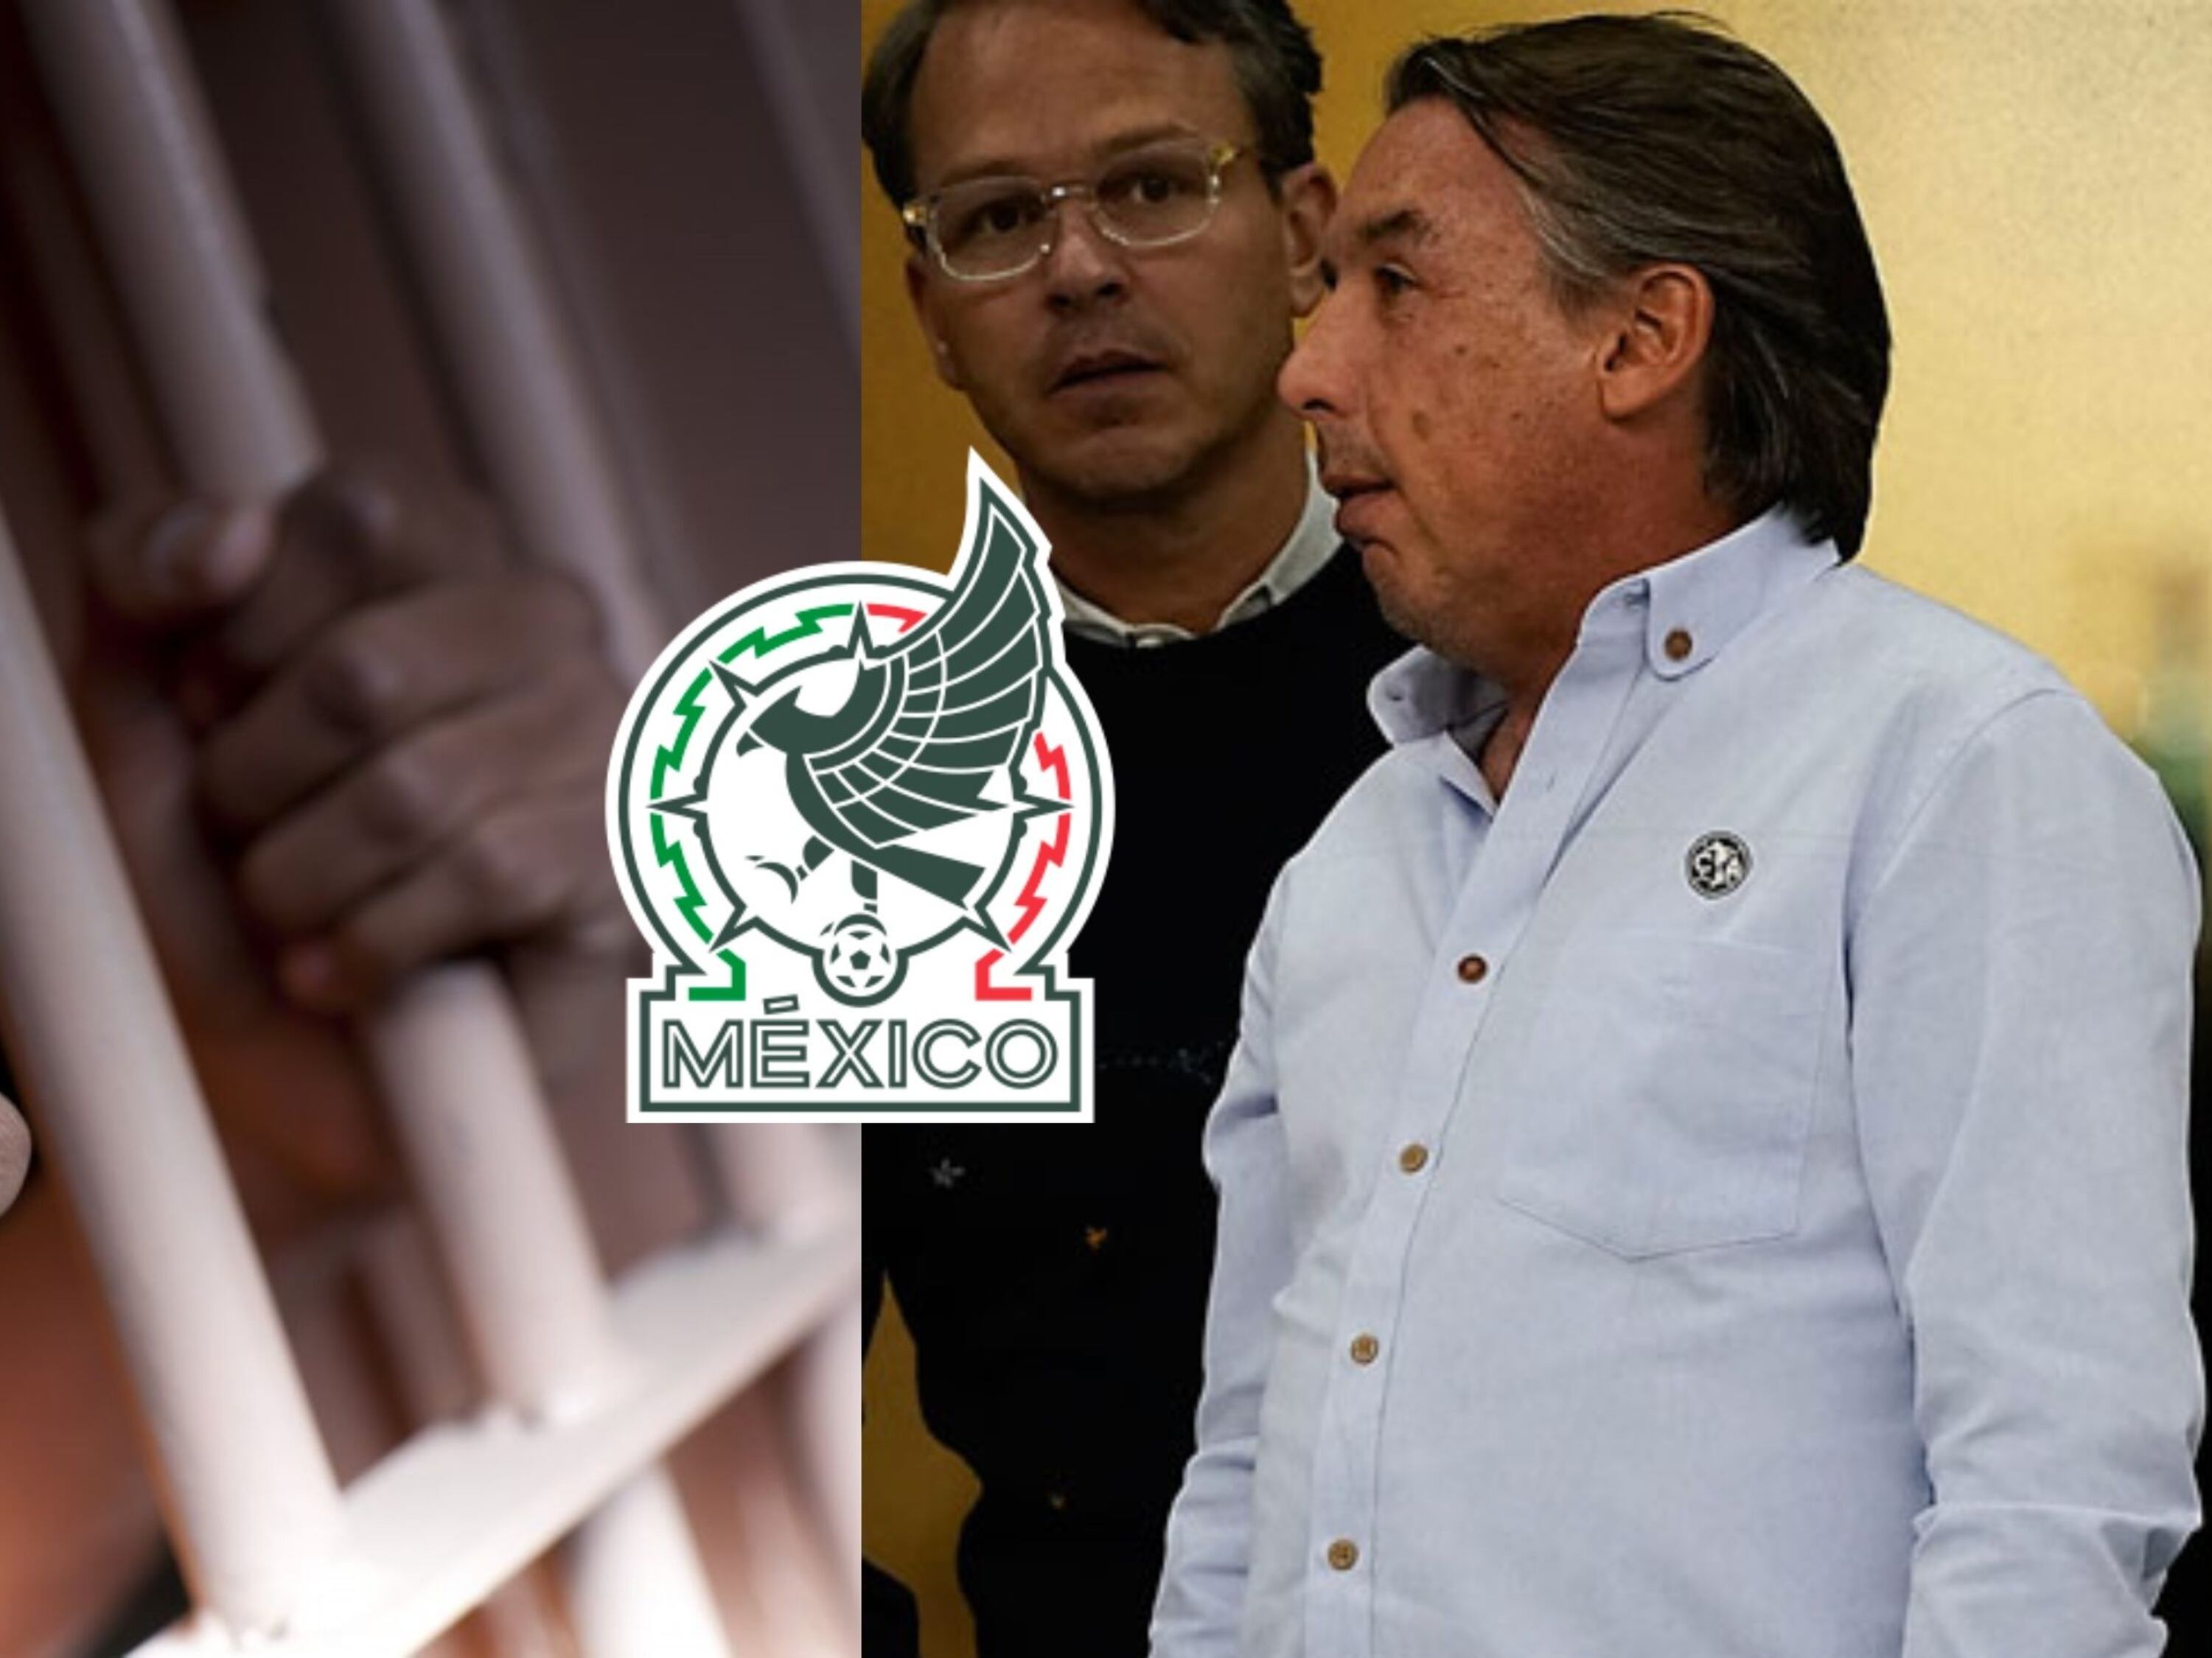 He was the worst thing that ever happened to El Tri, but Azcarraga backed him, now he would go to prison